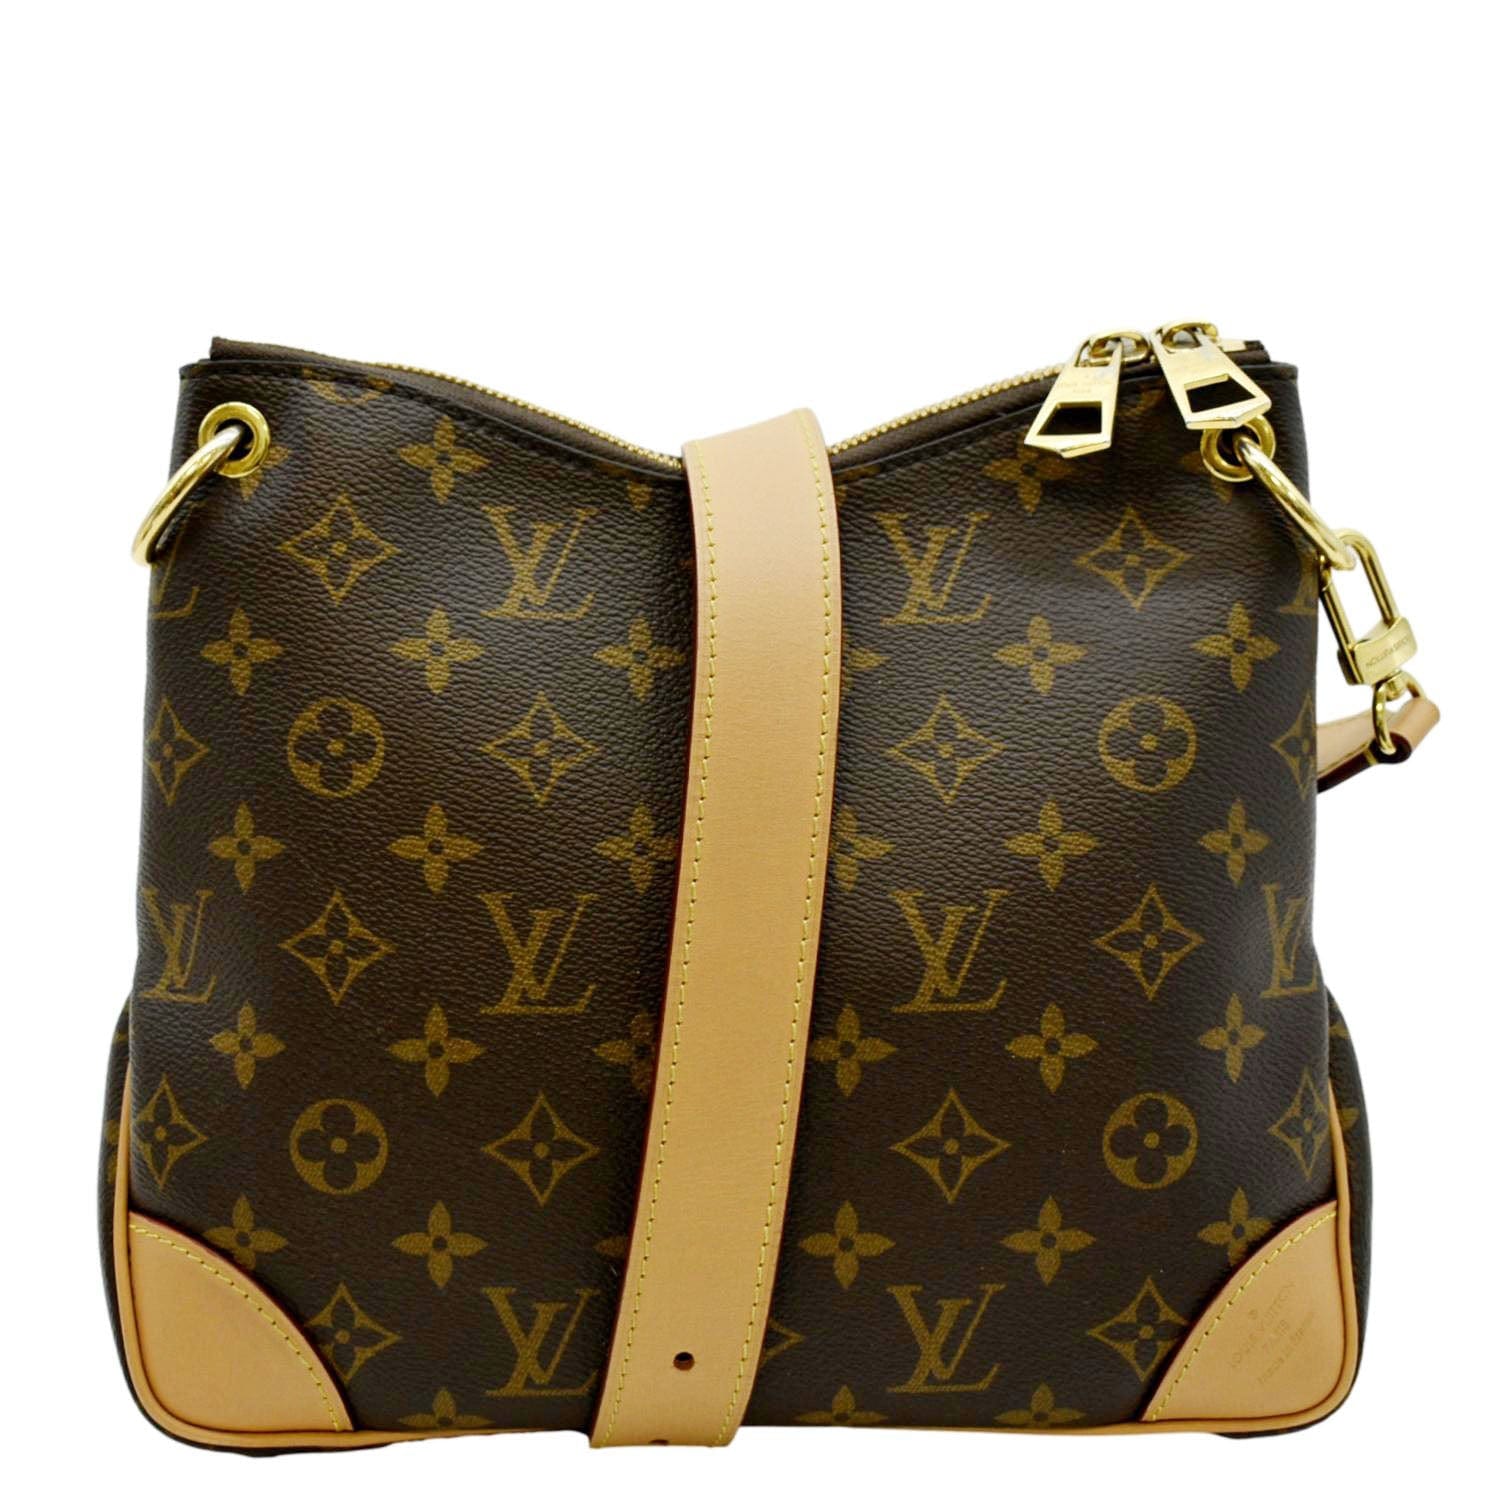 What's in my bag? LV Odeon PM vs MM 